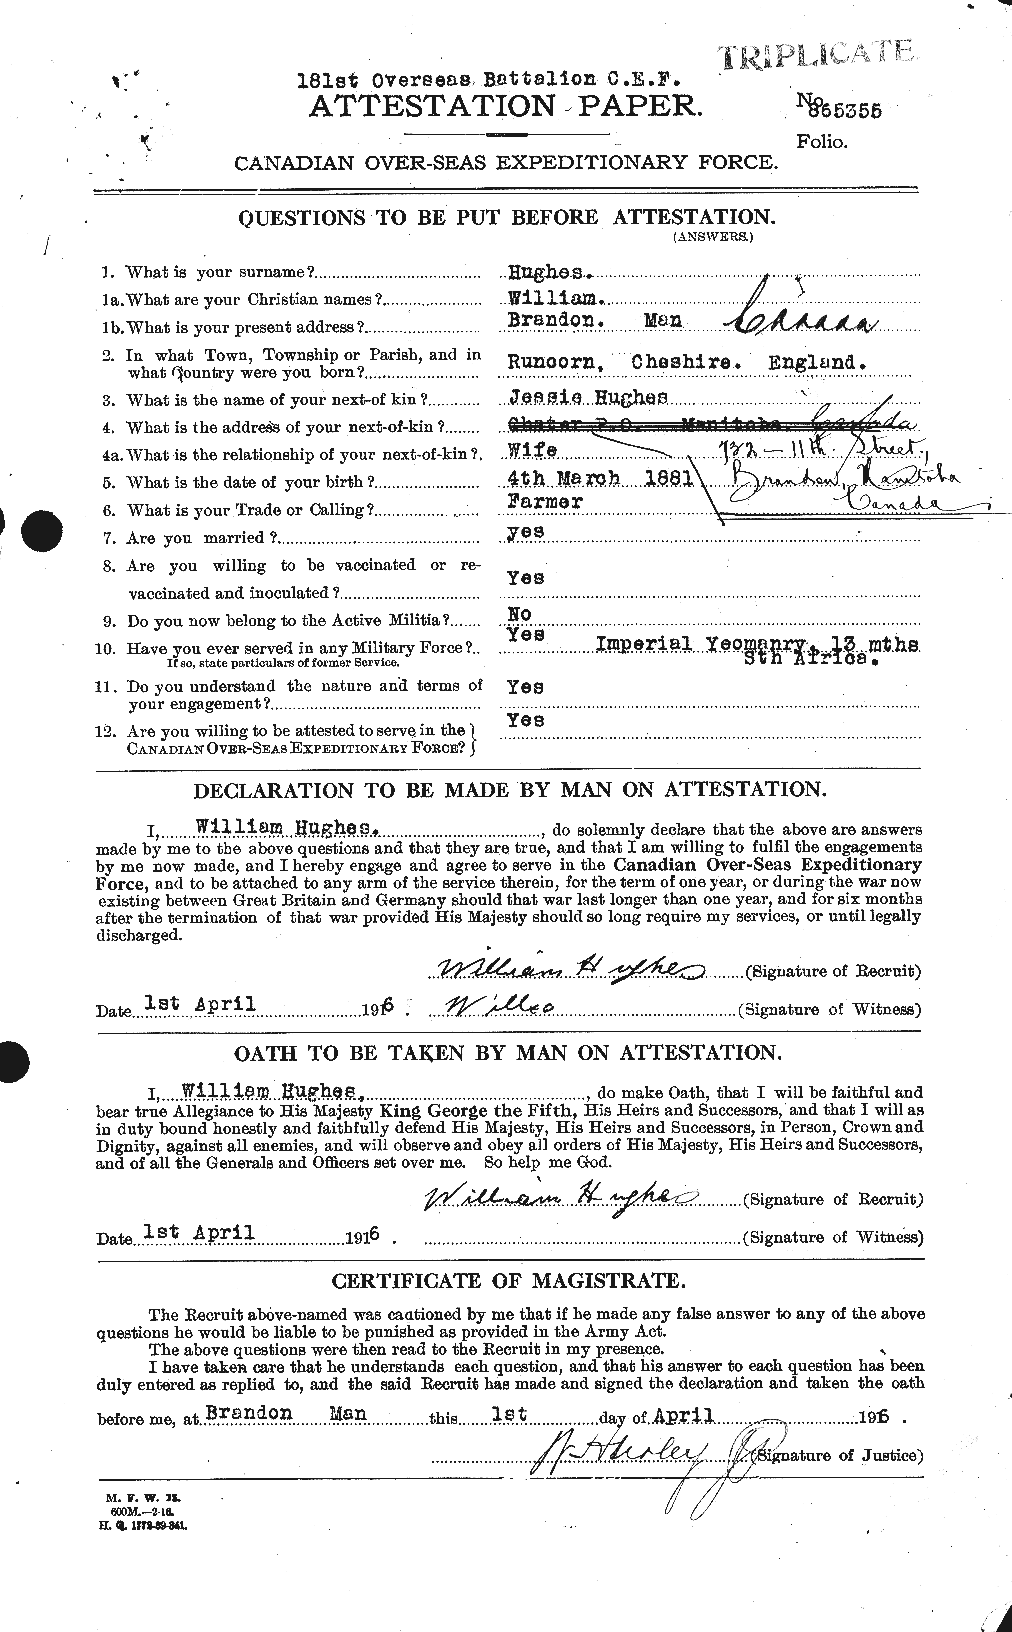 Personnel Records of the First World War - CEF 405878a